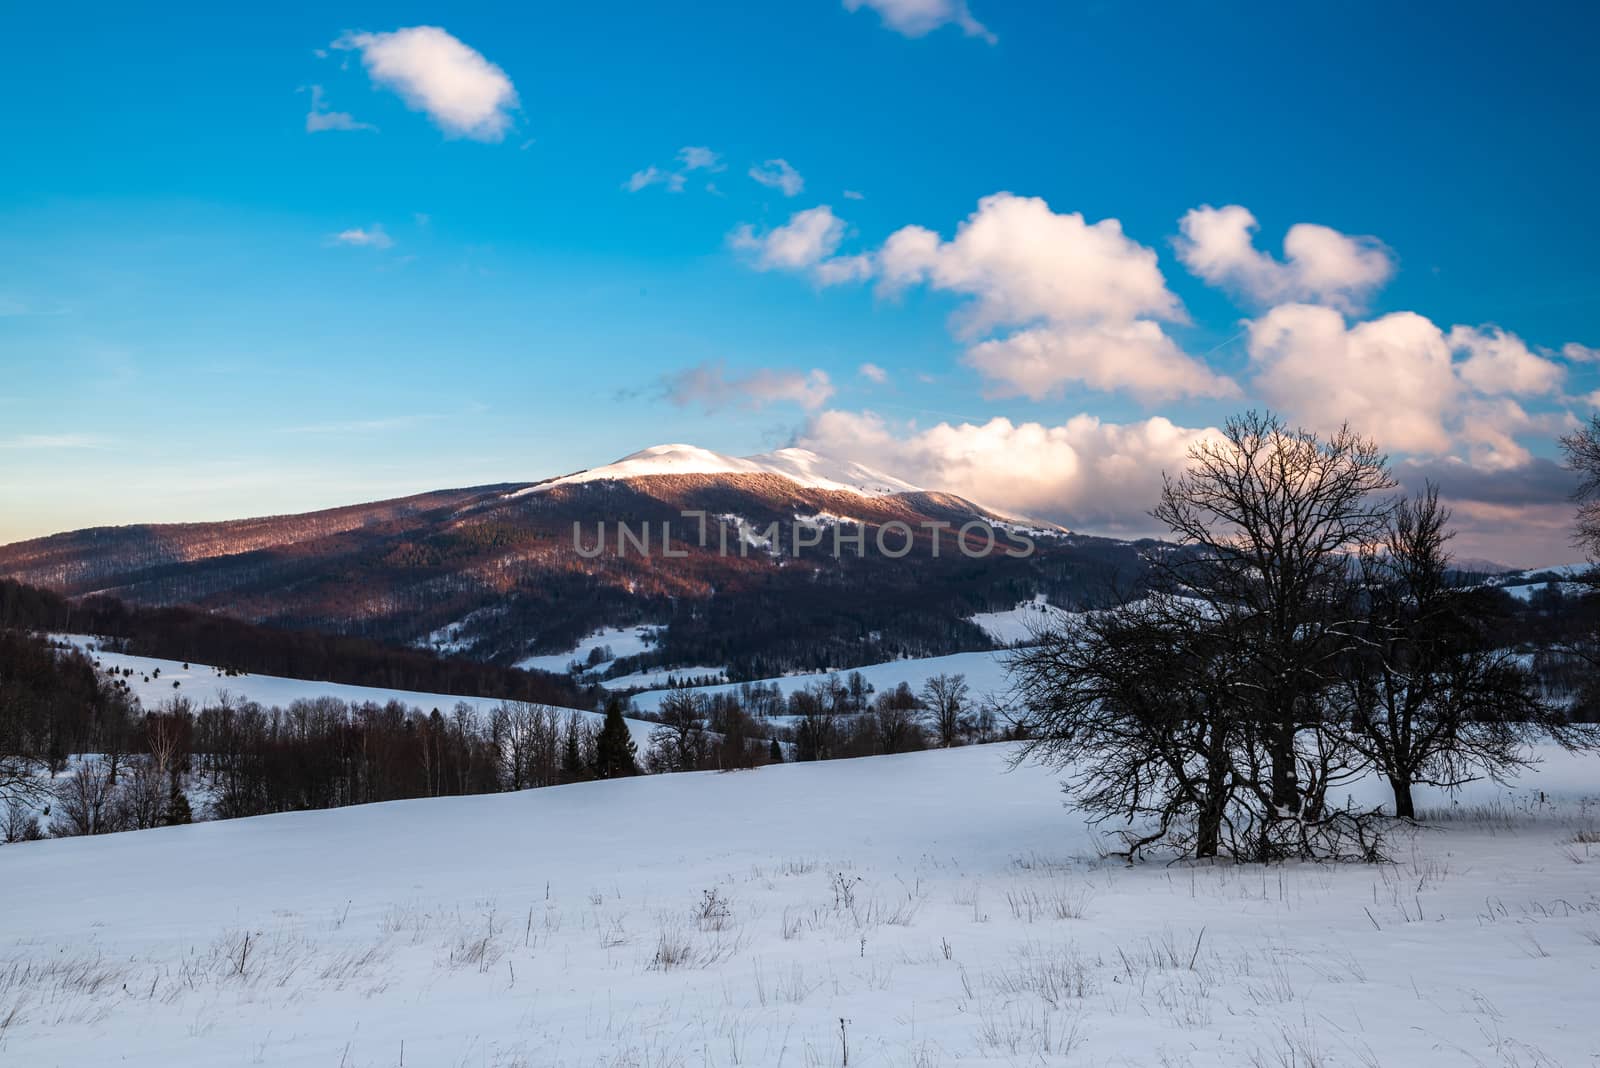 Cloudscape at Wetlina in Bieszczady Mountains, Poland at Winter Season.